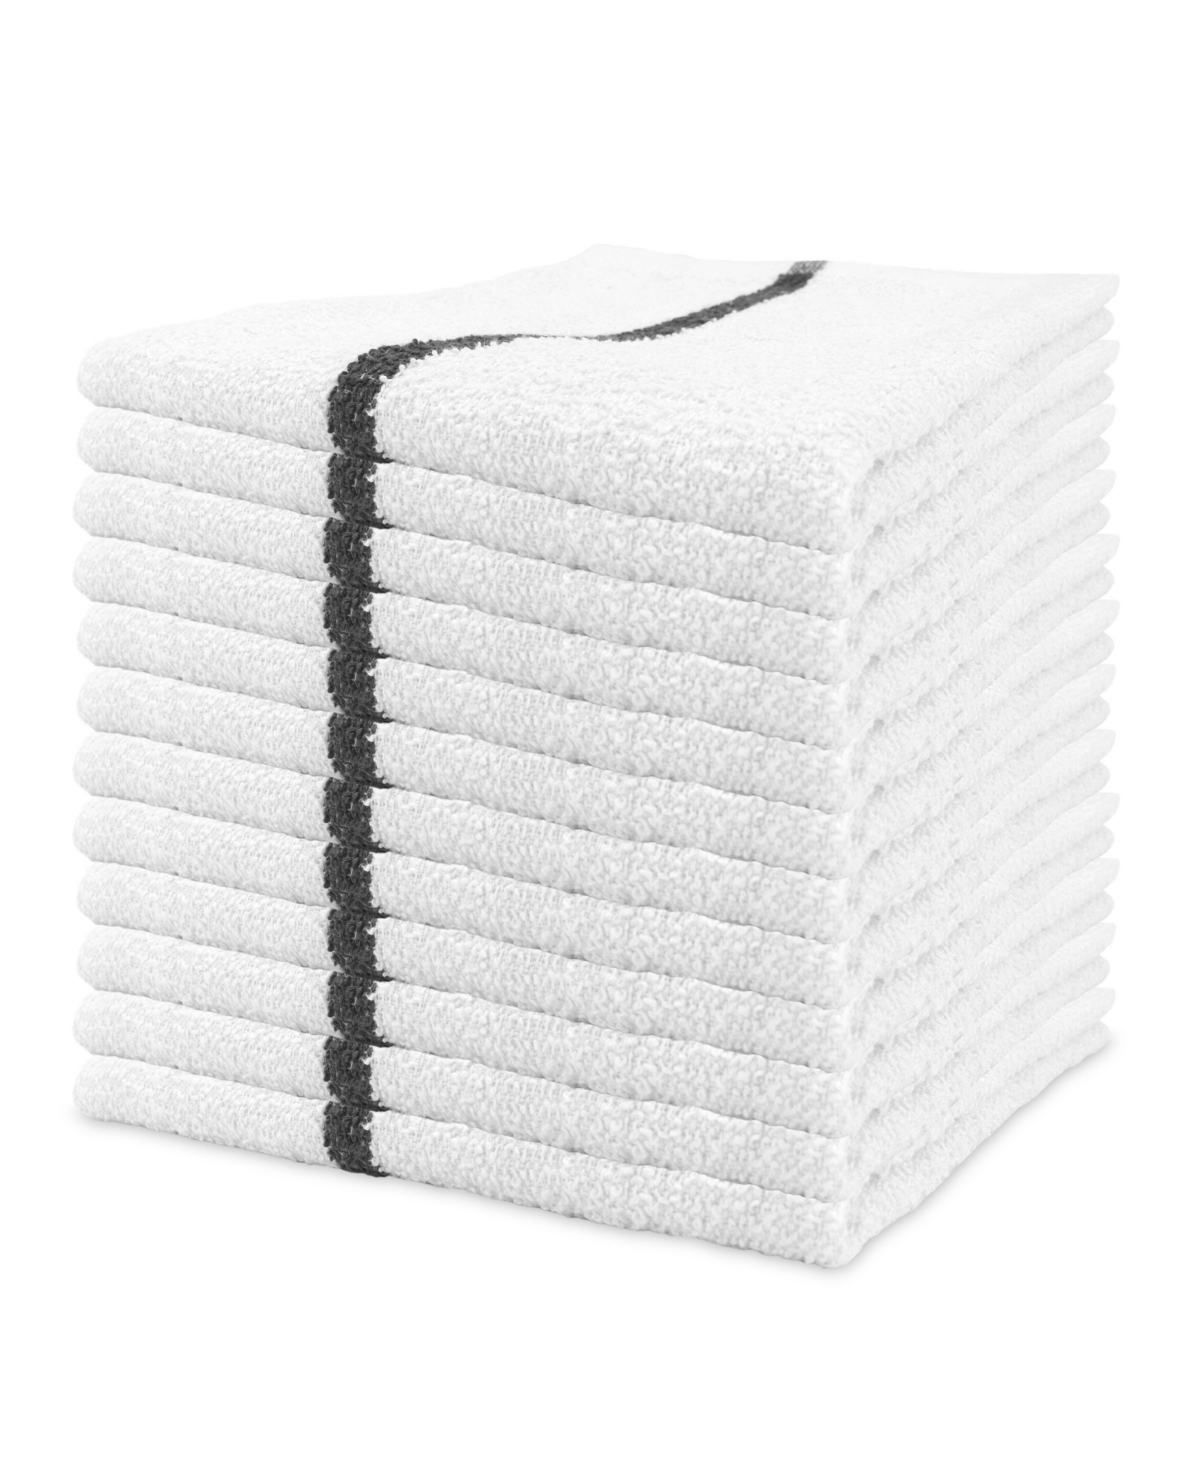 Arkwright Qwick Wick Bar Mop Towels (12 Pack), Cotton, 16x19 in., Multipurpose Terry Cleanup Towels, Striped Color Options - Red